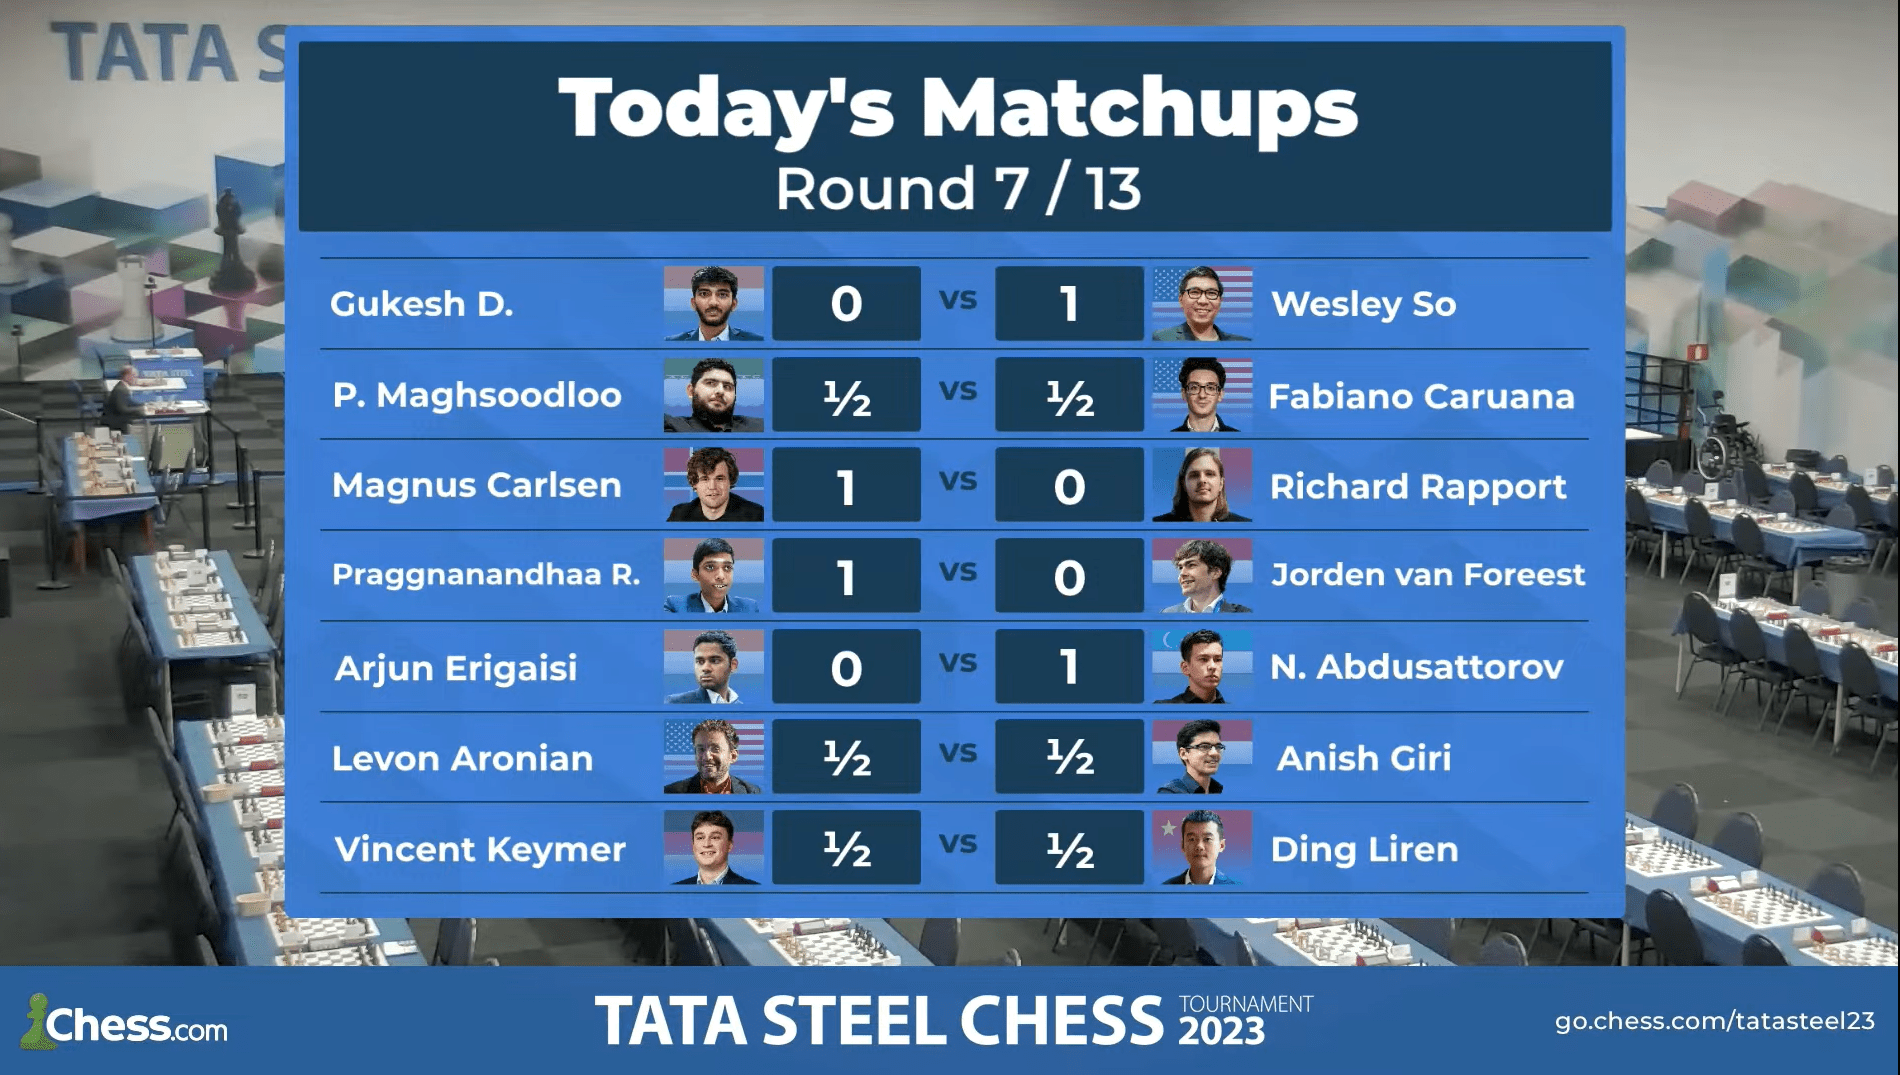 Abdusattorov leads by a point after 7 rounds of the Tata Steel